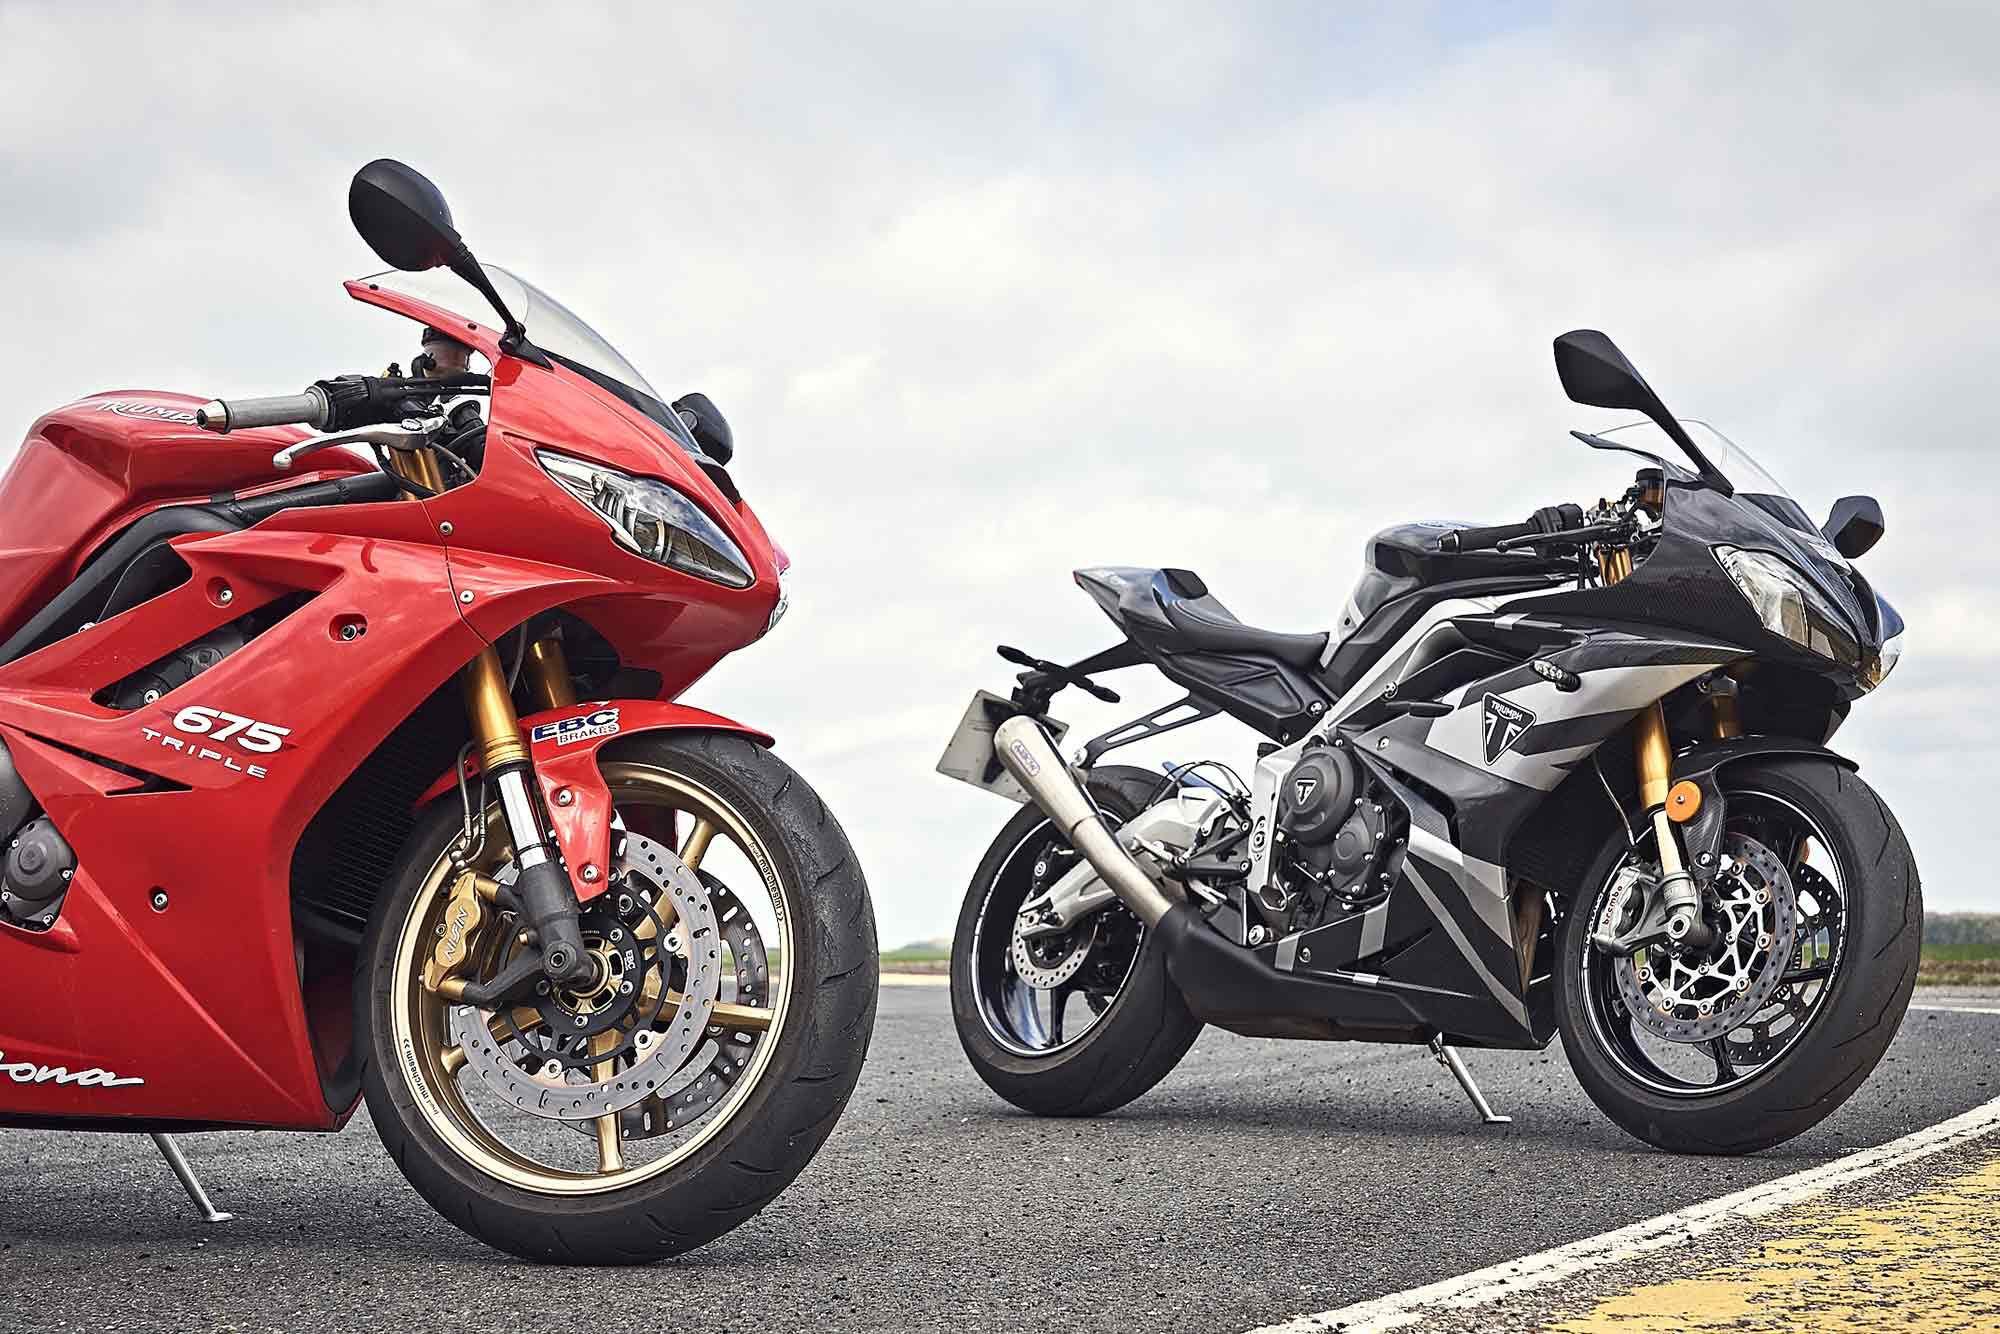 How does a 15-year-old Triumph Daytona 675 stack up against the limited-edition 2021 Daytona Moto2 765?